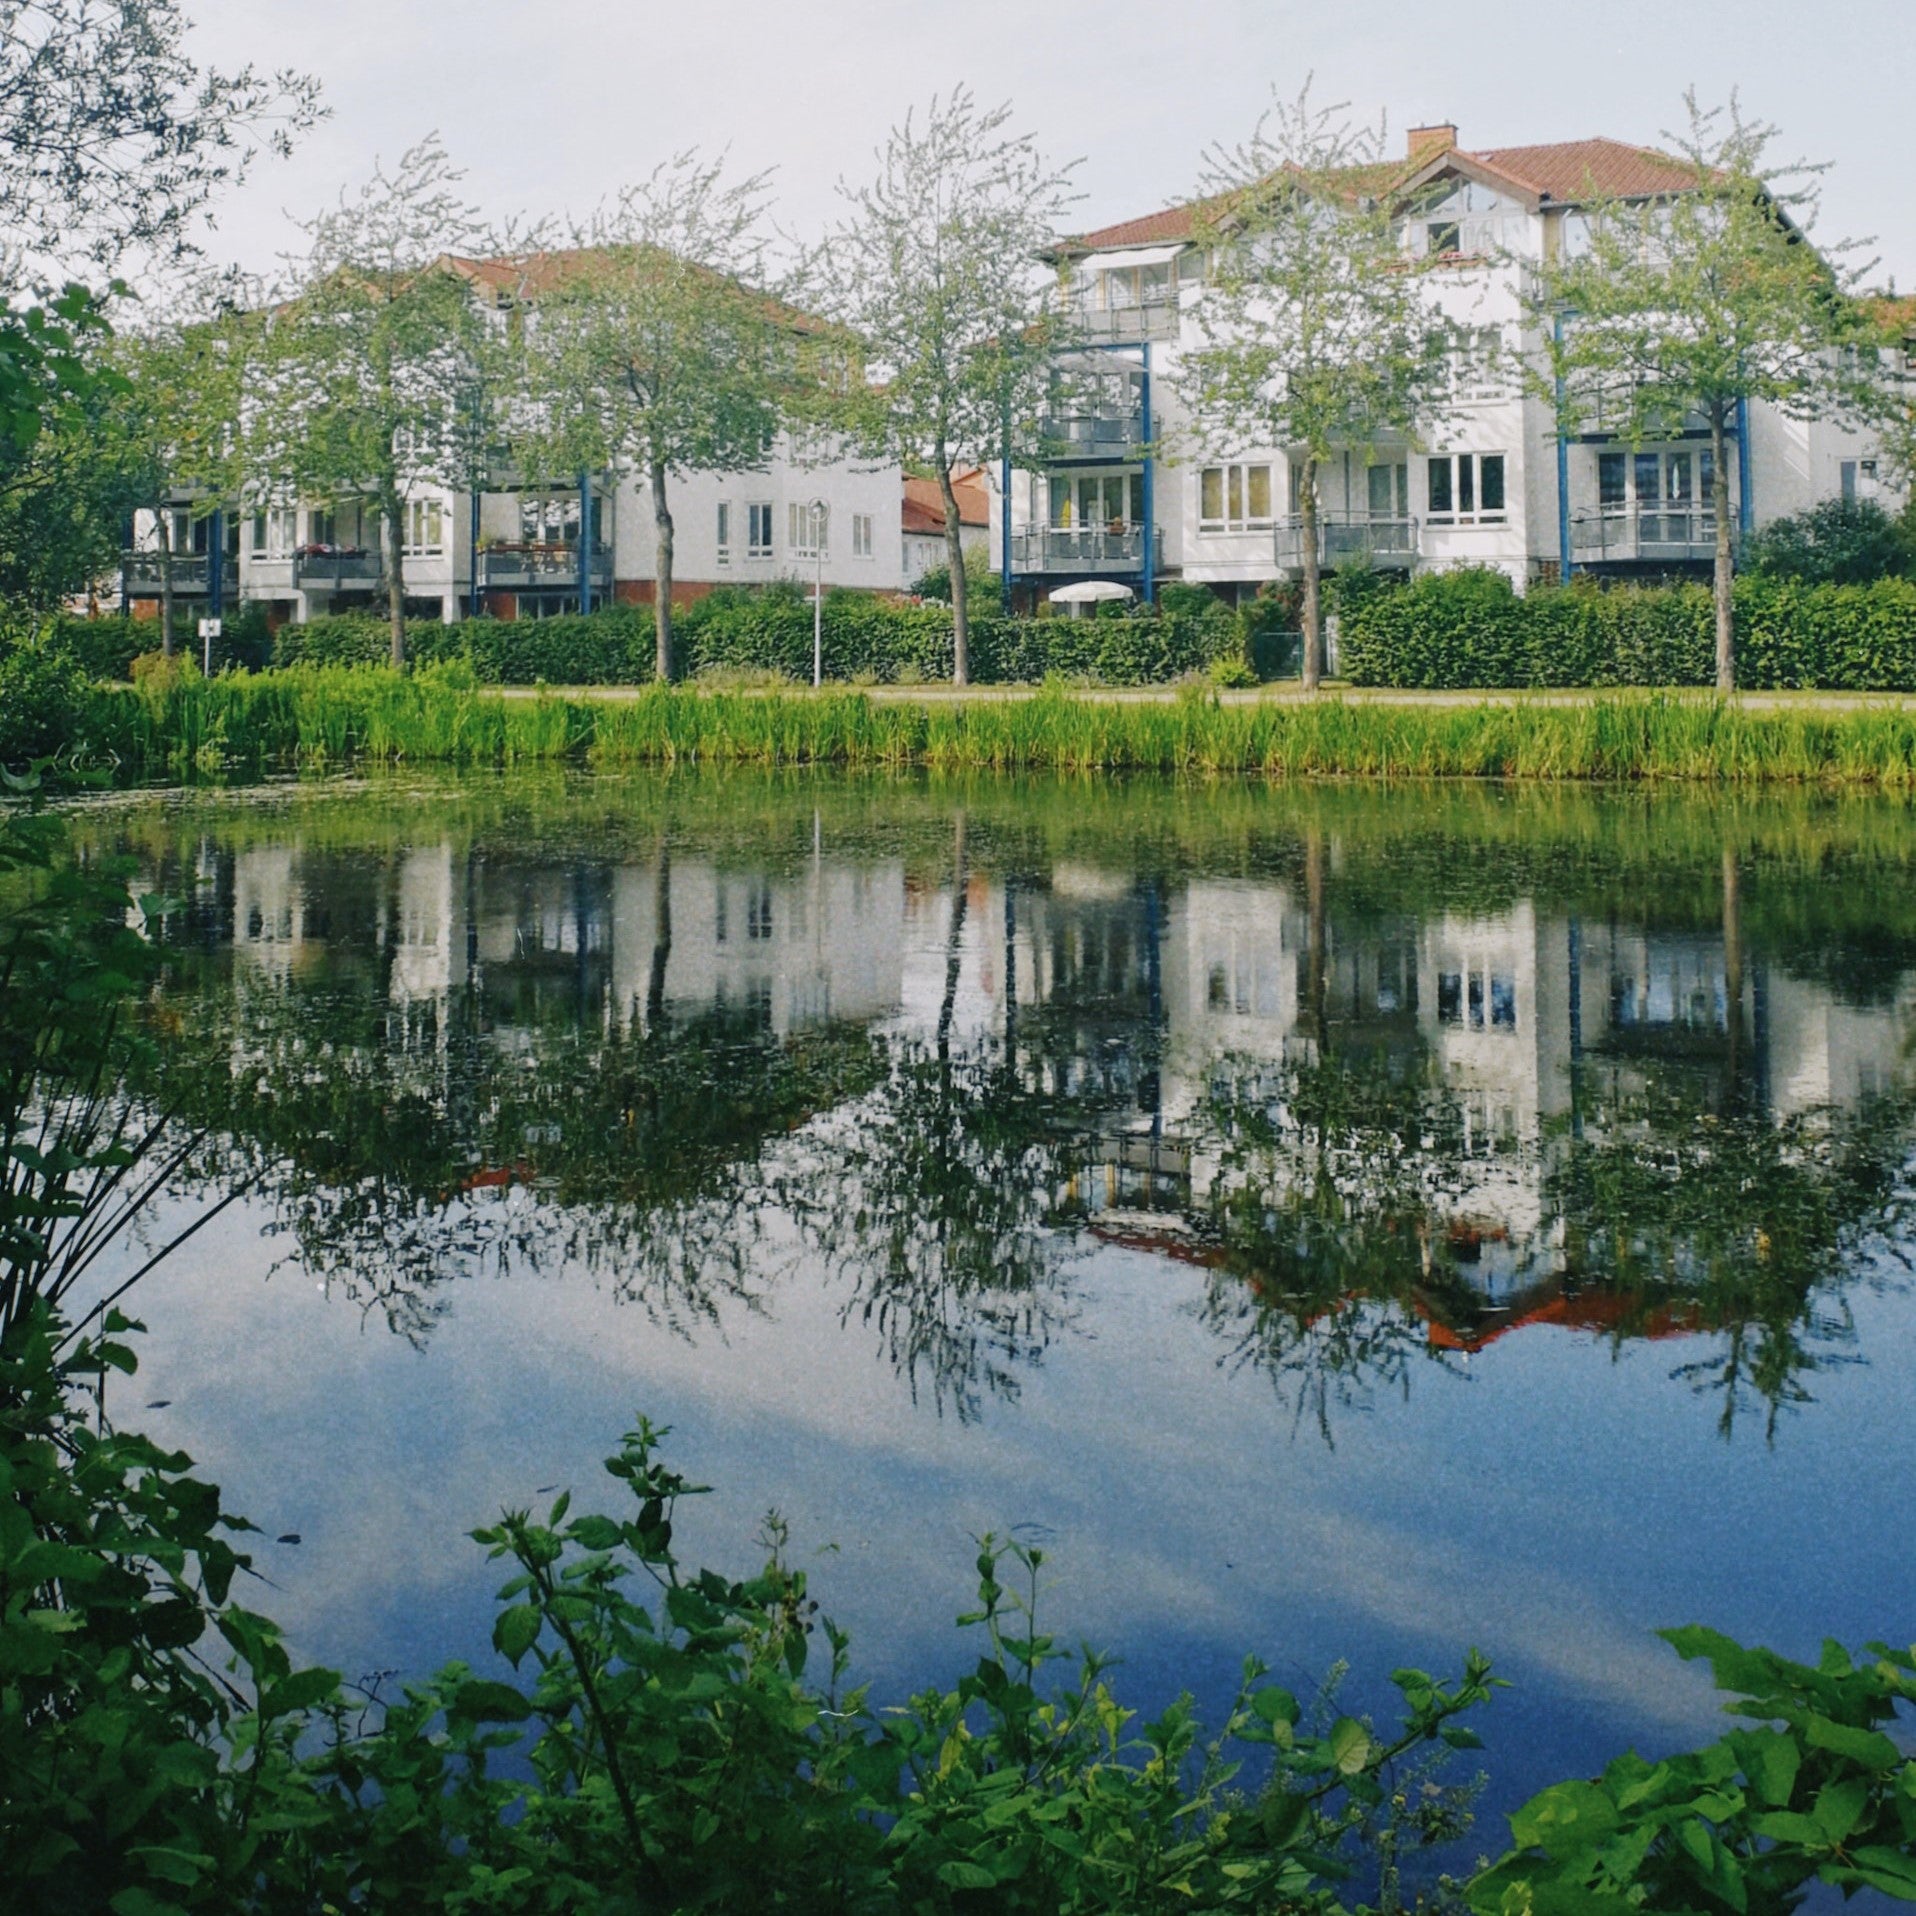 Natural wetland in a residential area